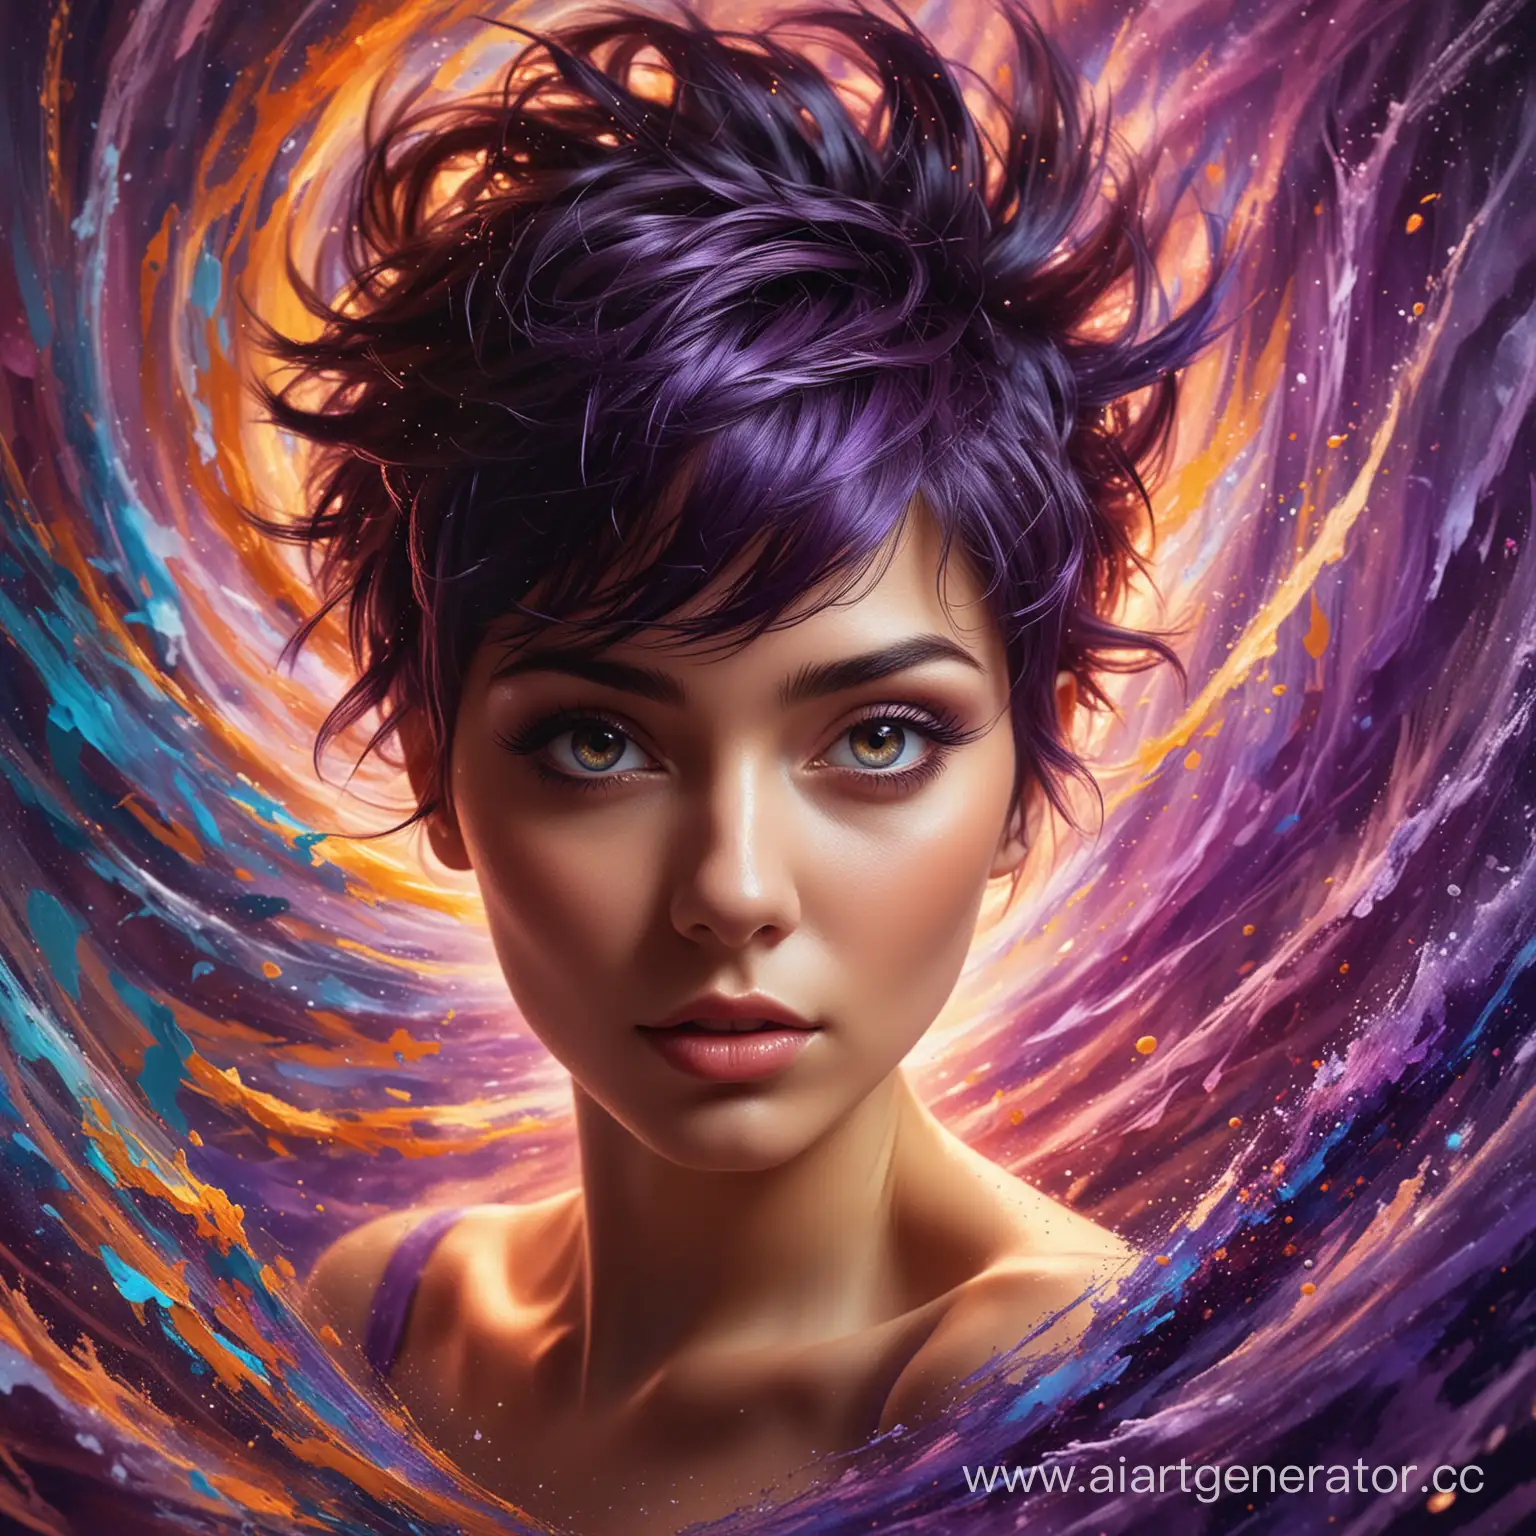 Mesmerizing-Dance-of-Light-Woman-with-Violet-Eyes-in-Vibrant-Color-Vortex